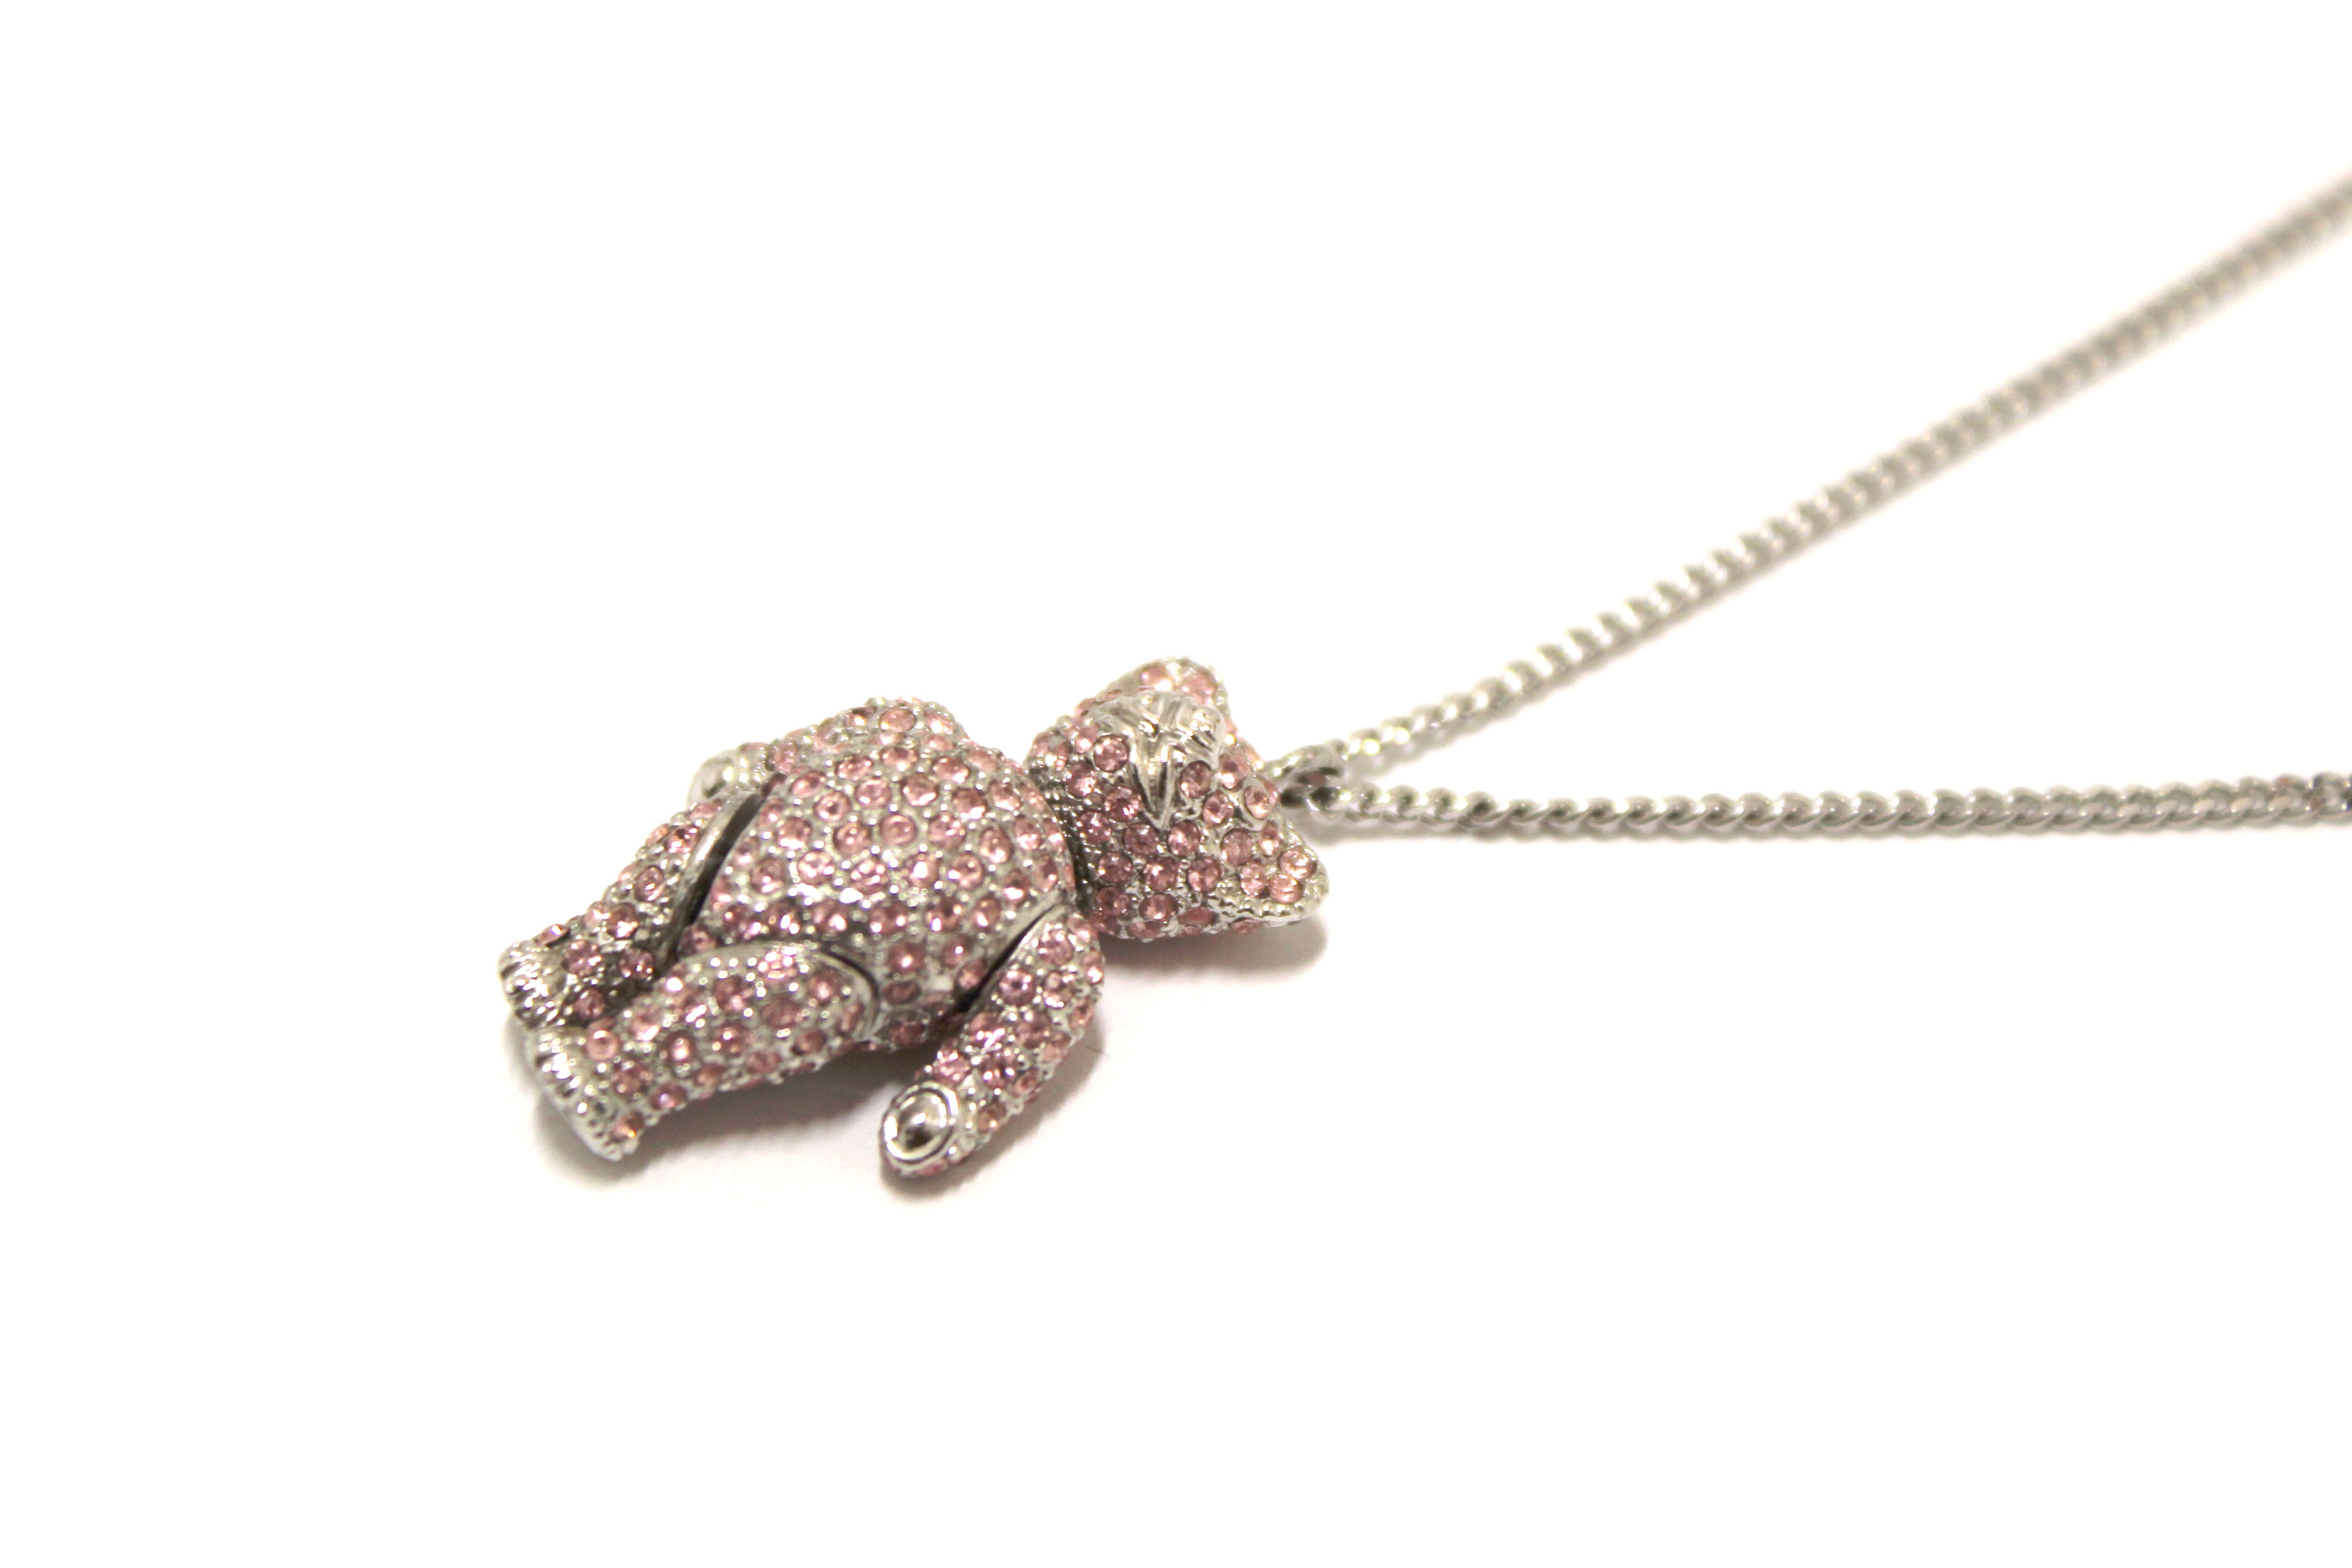 Authentic Christian Dior Vintage Pink Crystal Teddy Bear Necklace